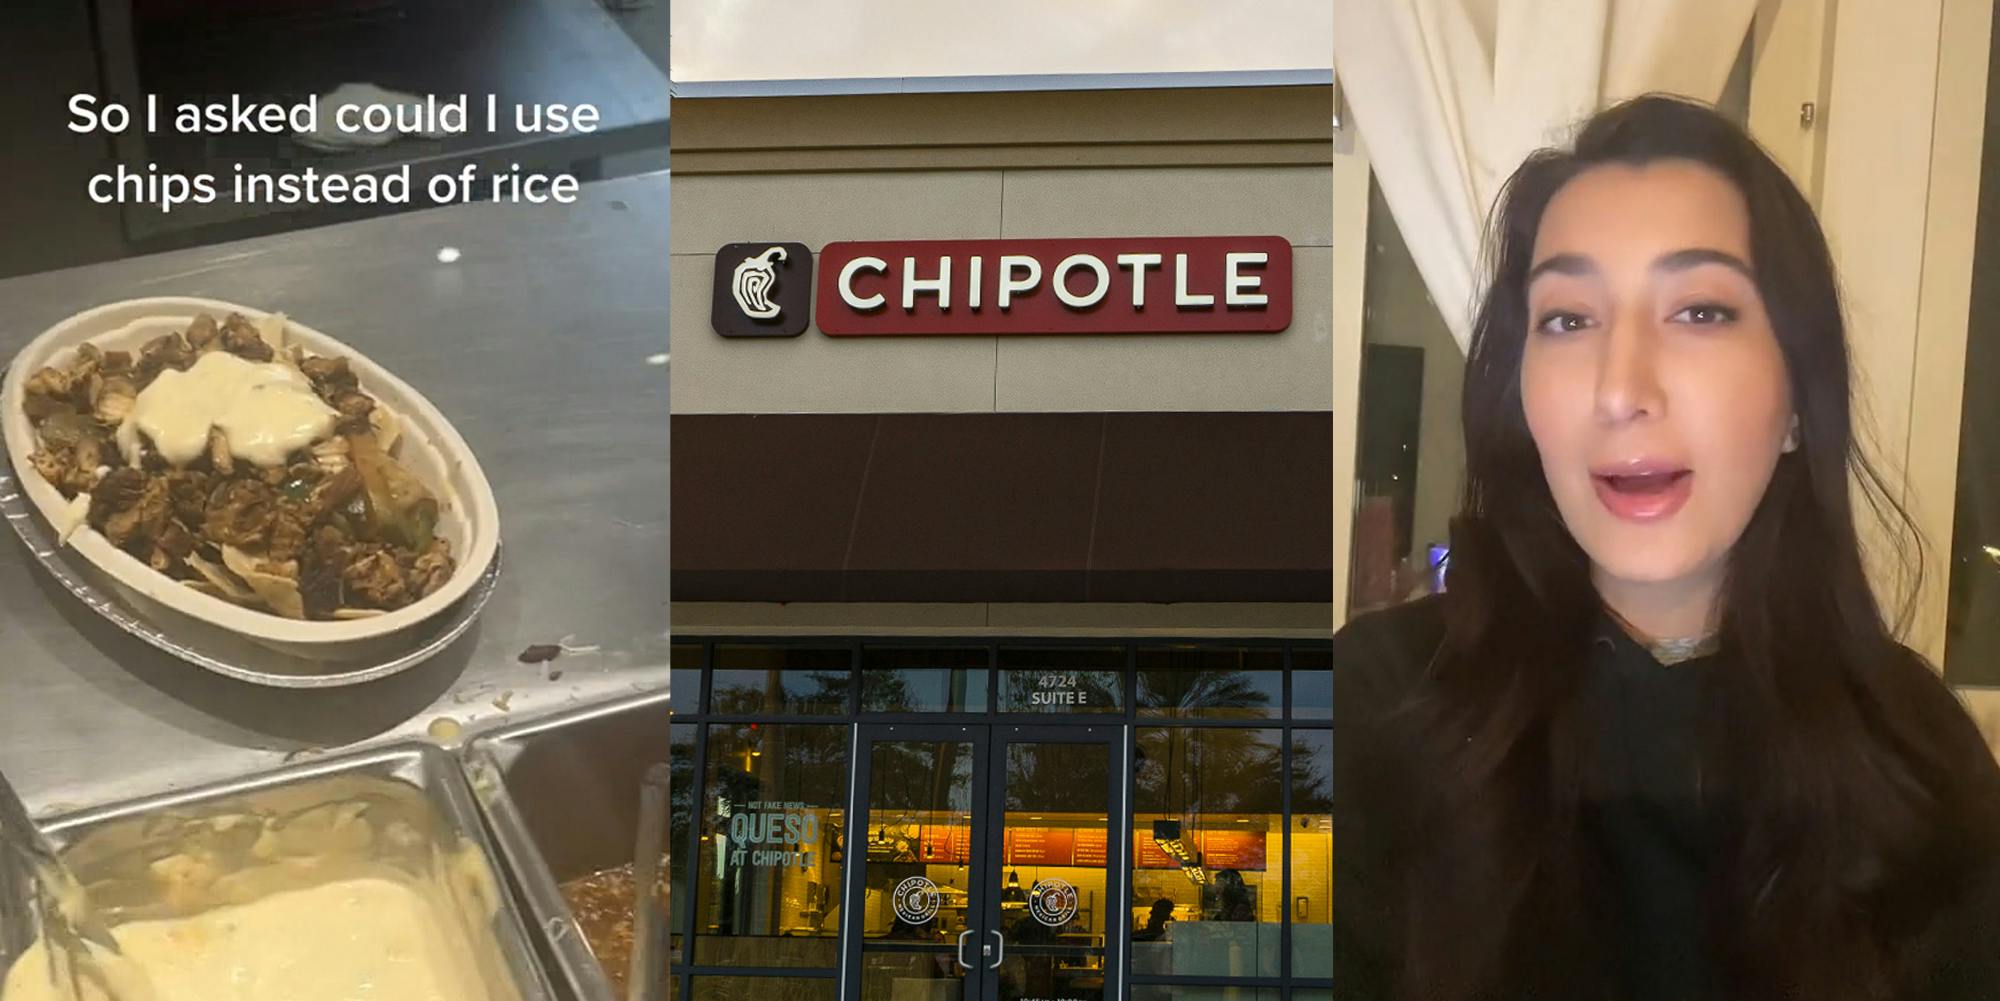 Chipotle bowl with chips instead of rice with caption "So I asked could I use chips instead of rice" (l) Chipotle building with sign (c) former Chipotle employee speaking (r)